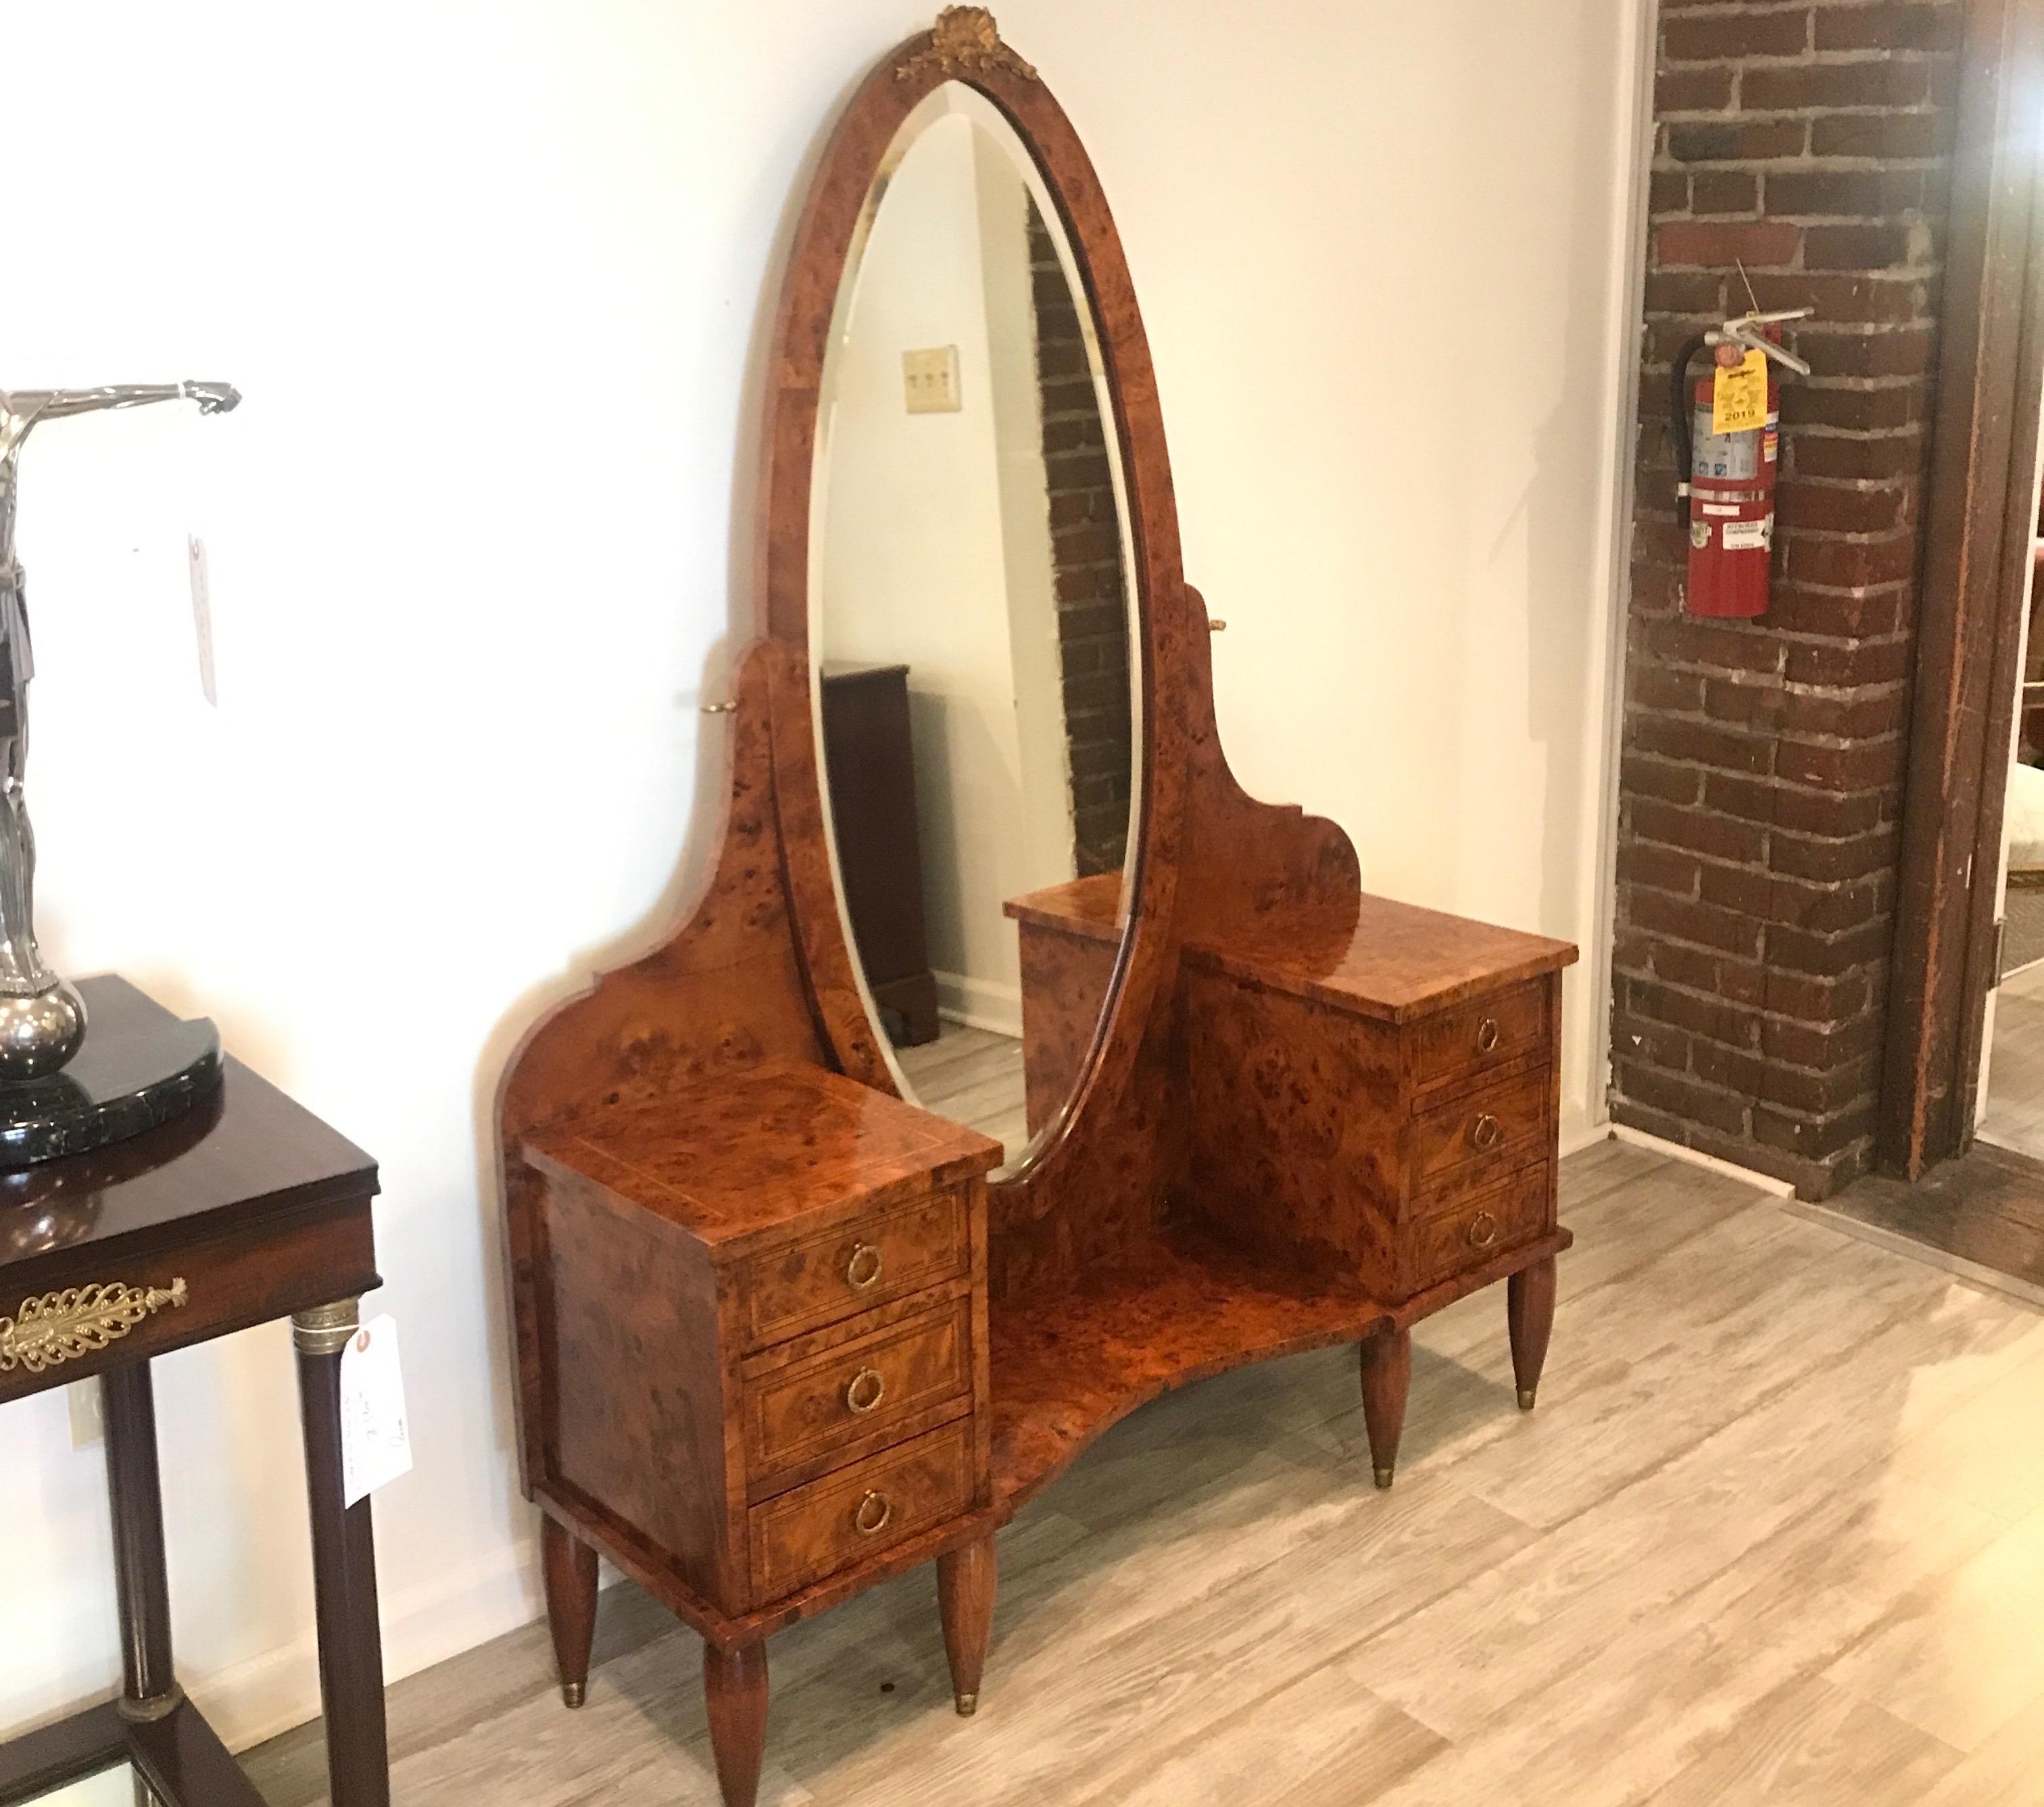 Graceful French burled walnut vanity with dramatic beveled oval mirror. Three drawers on each side with gilt bronze ring handles. The beveled mirror with ormolu mount on top which tilts.